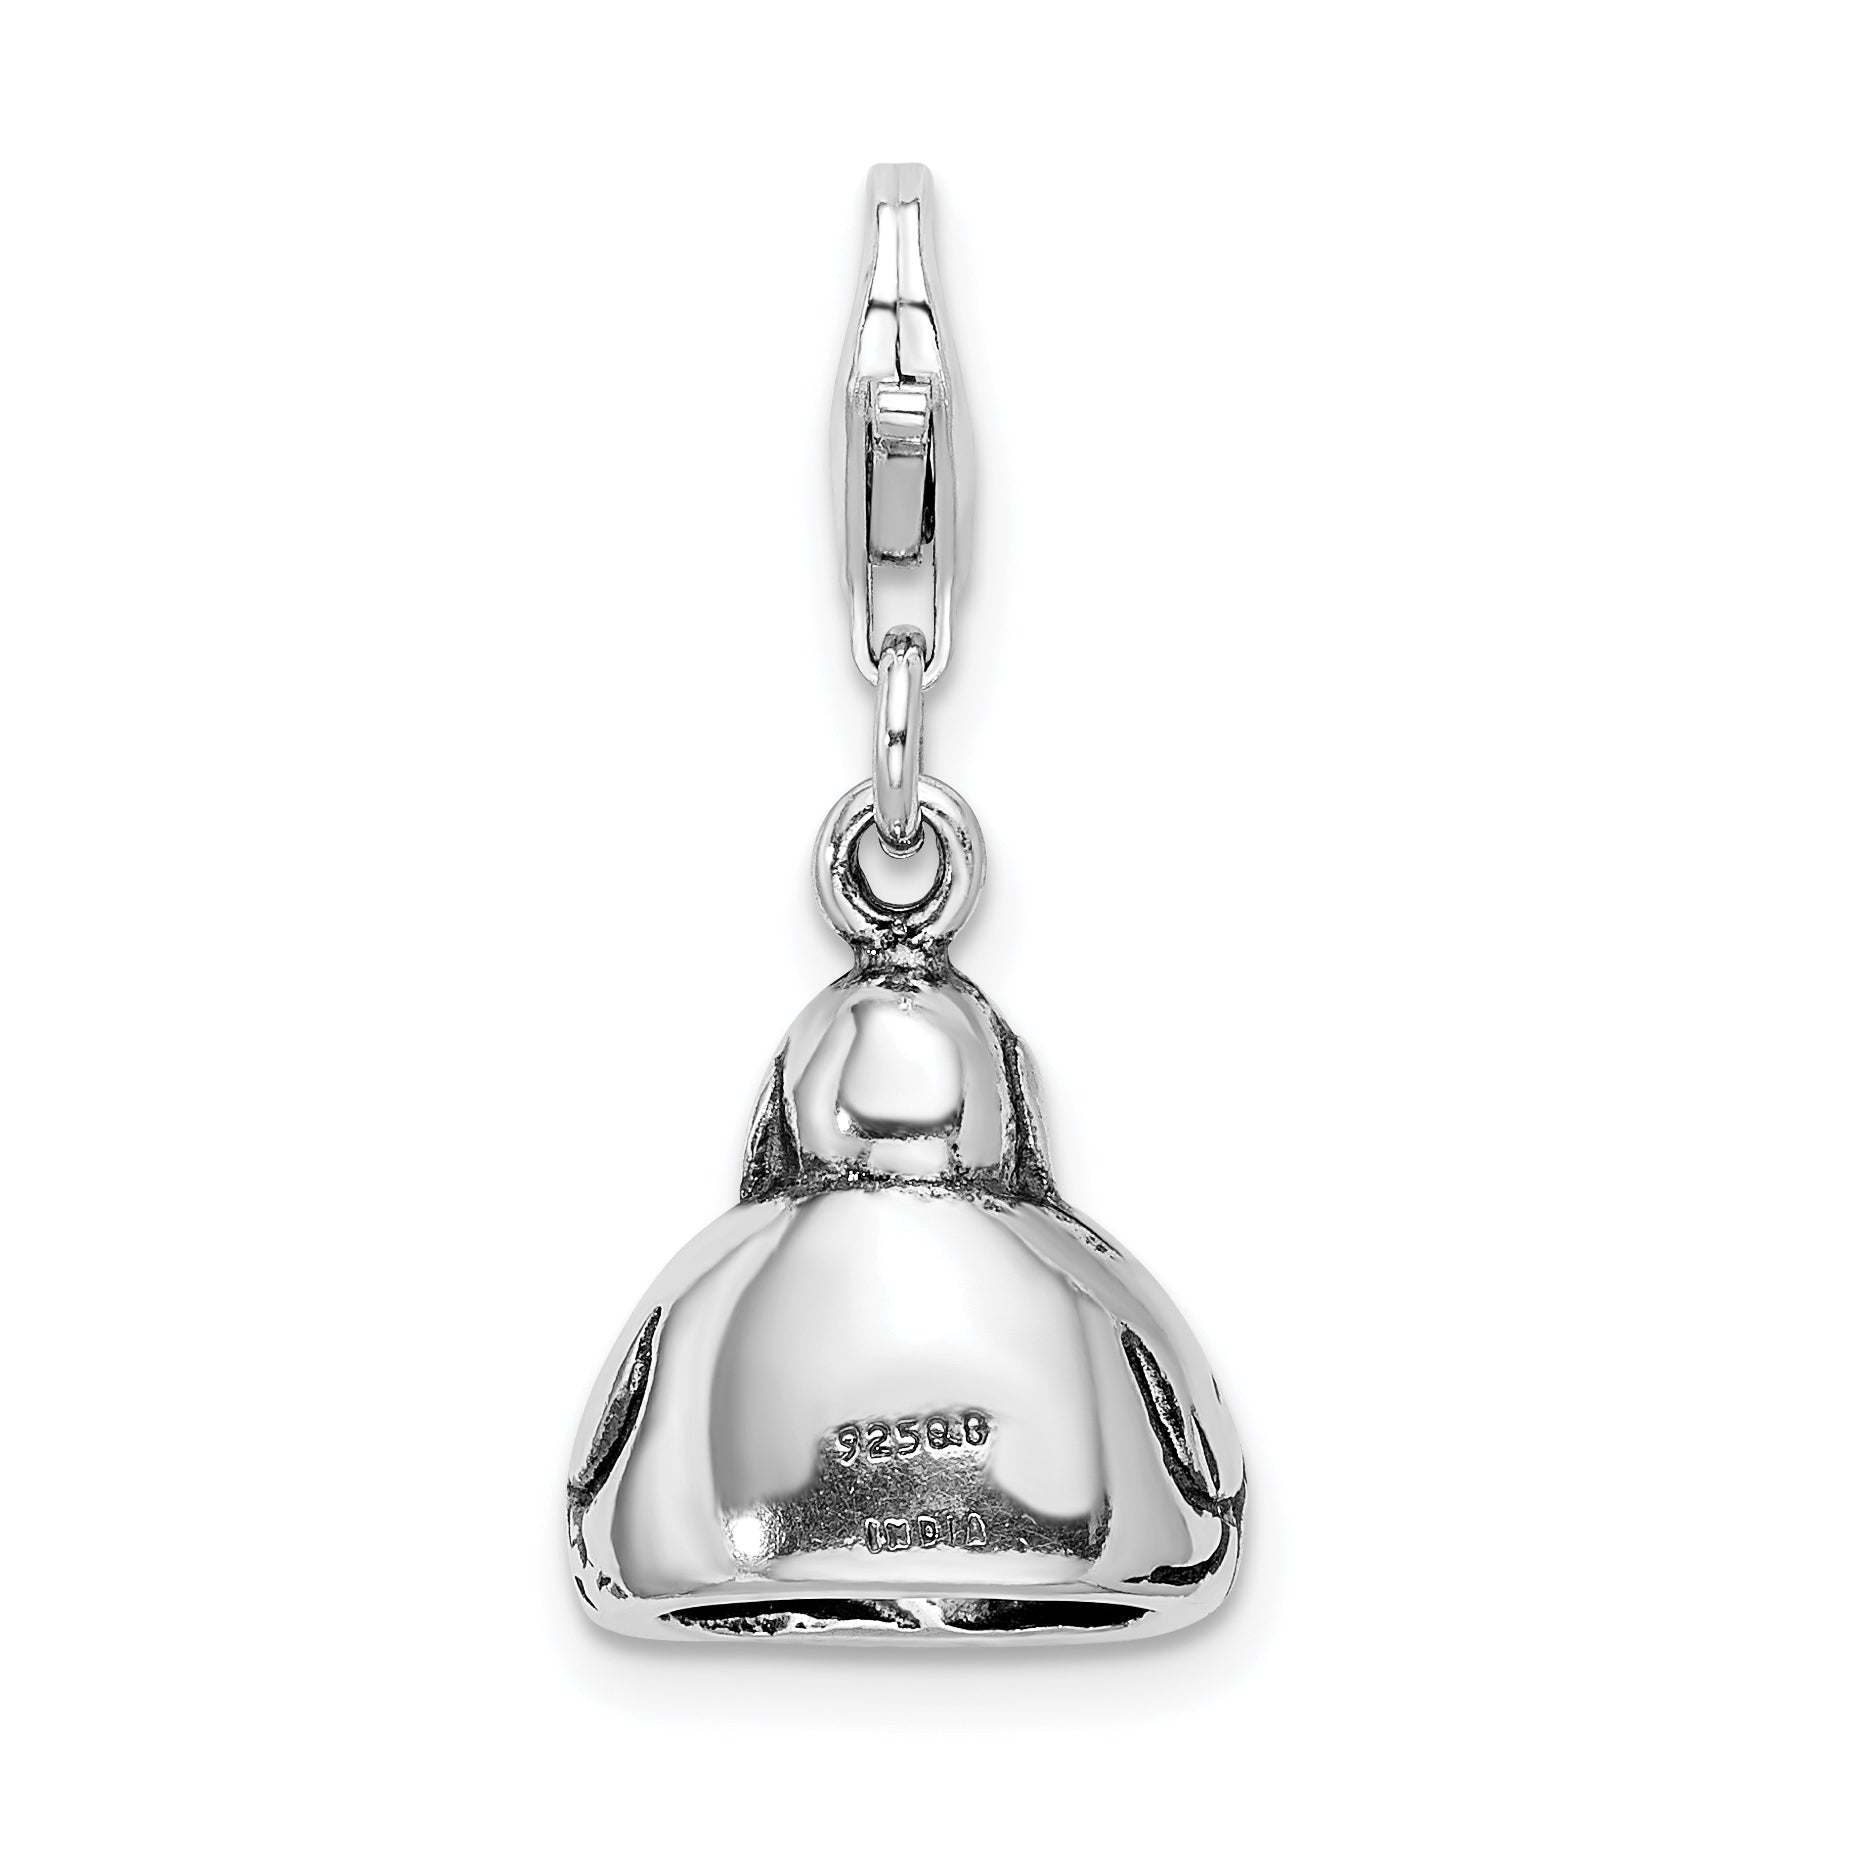 Amore La Vita Sterling Silver Rhodium-plated Polished 3-D Antiqued Buddha Charm with Fancy Lobster Clasp